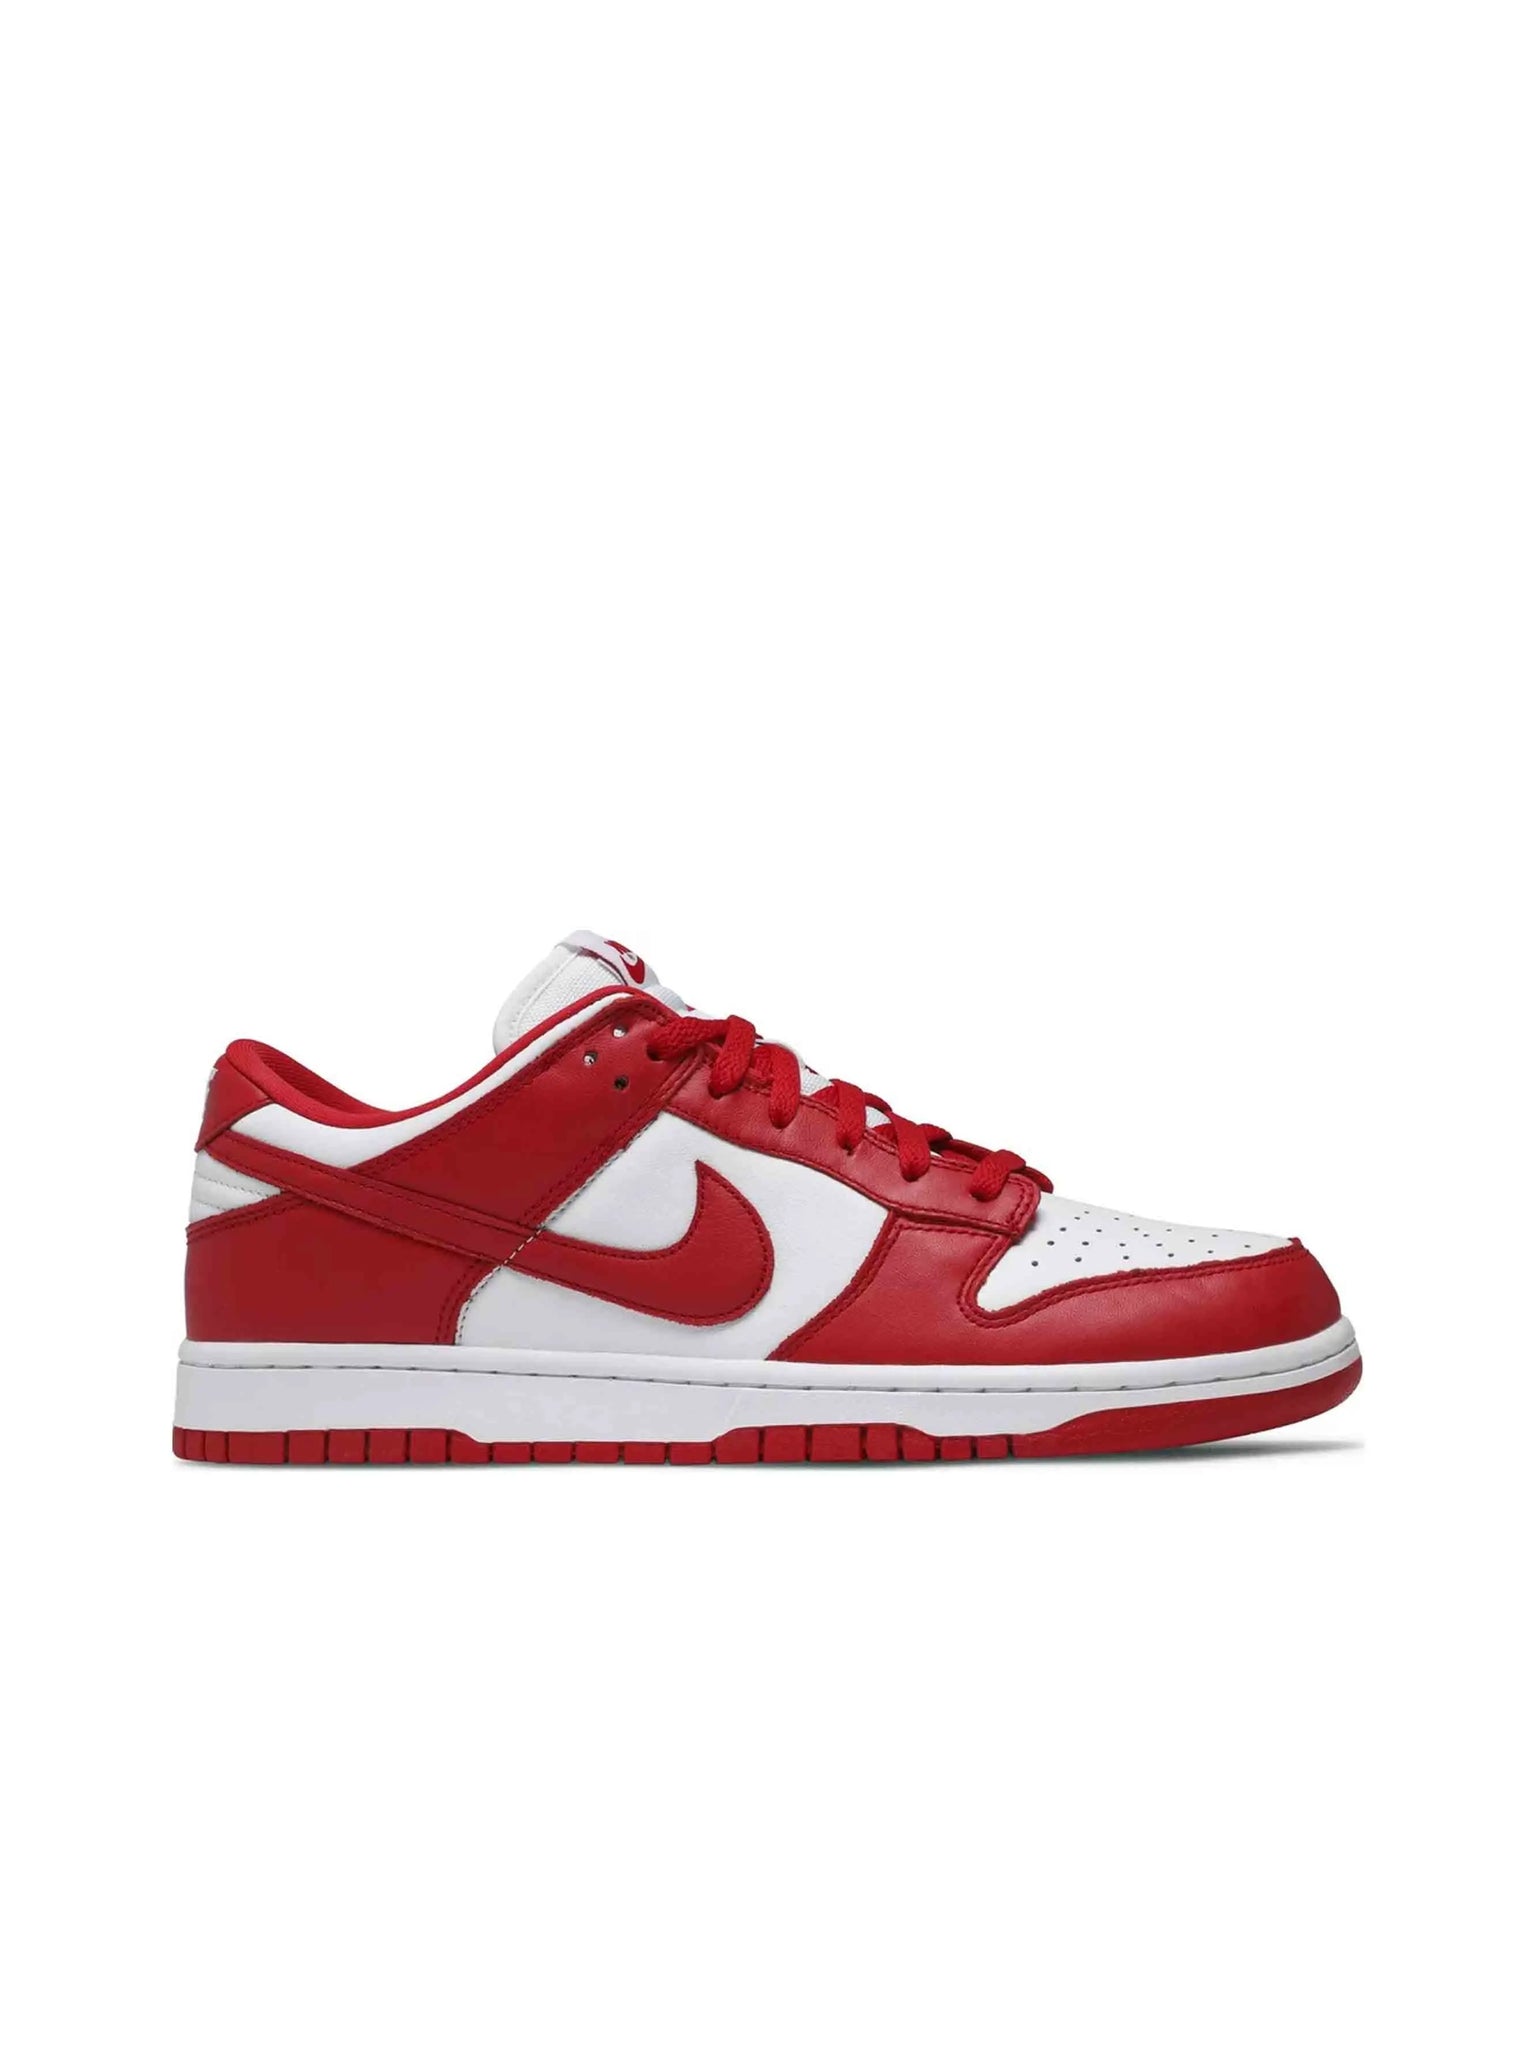 Air Force 1 Low Louis Vuitton White Royal – ITRSNEAKERSTORE